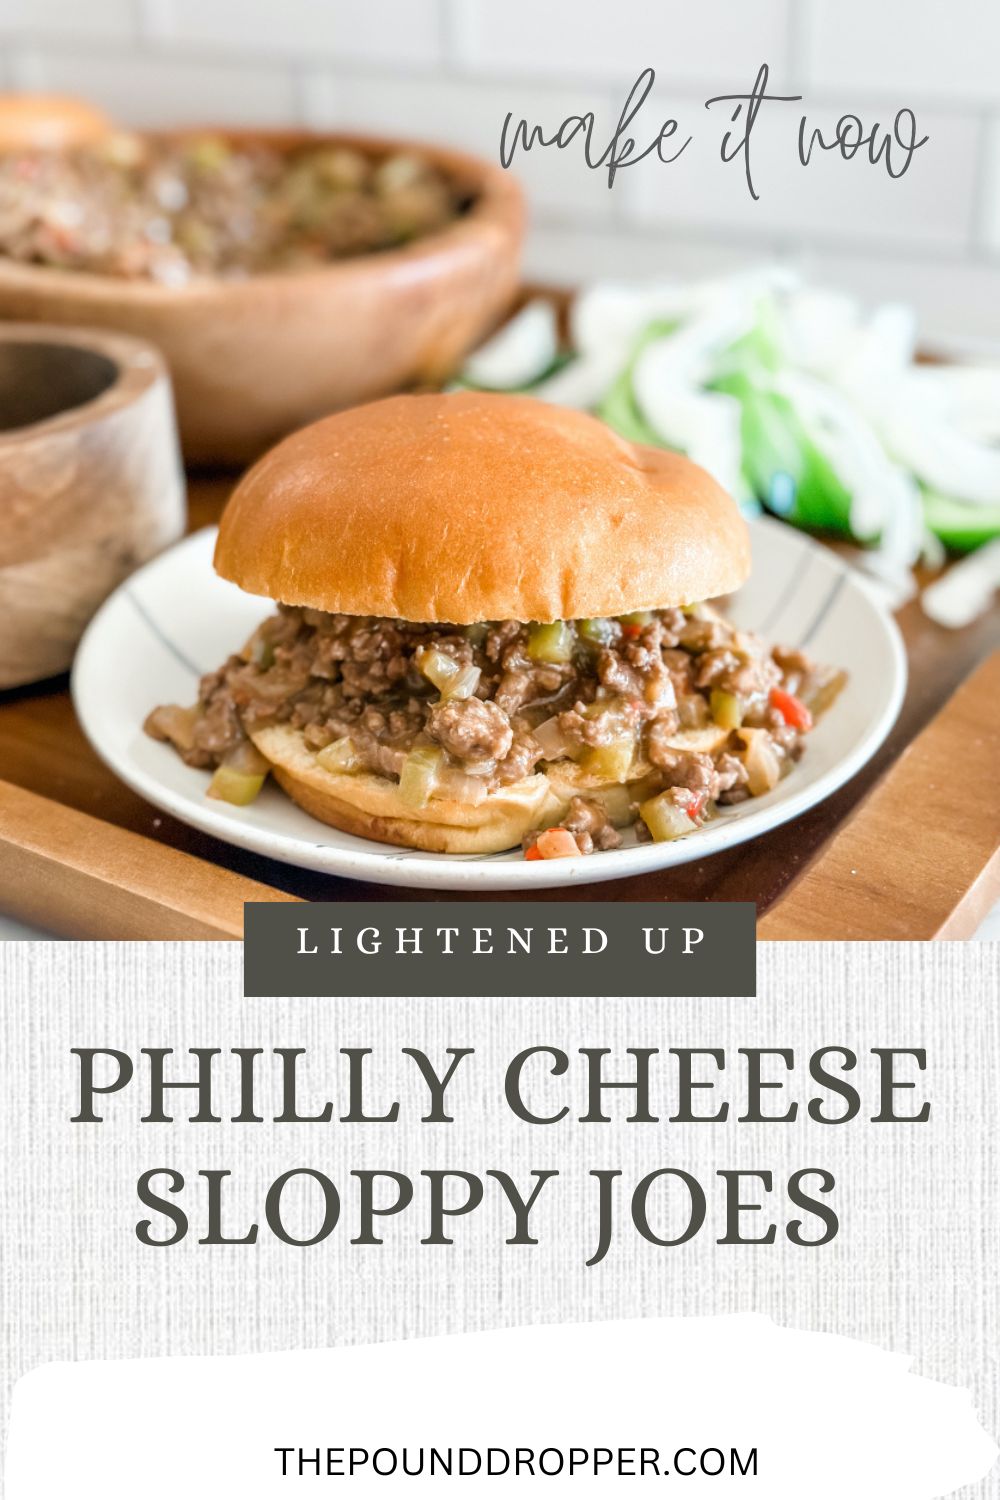 Lightened Up Philly Cheese Sloppy Joes via @pounddropper